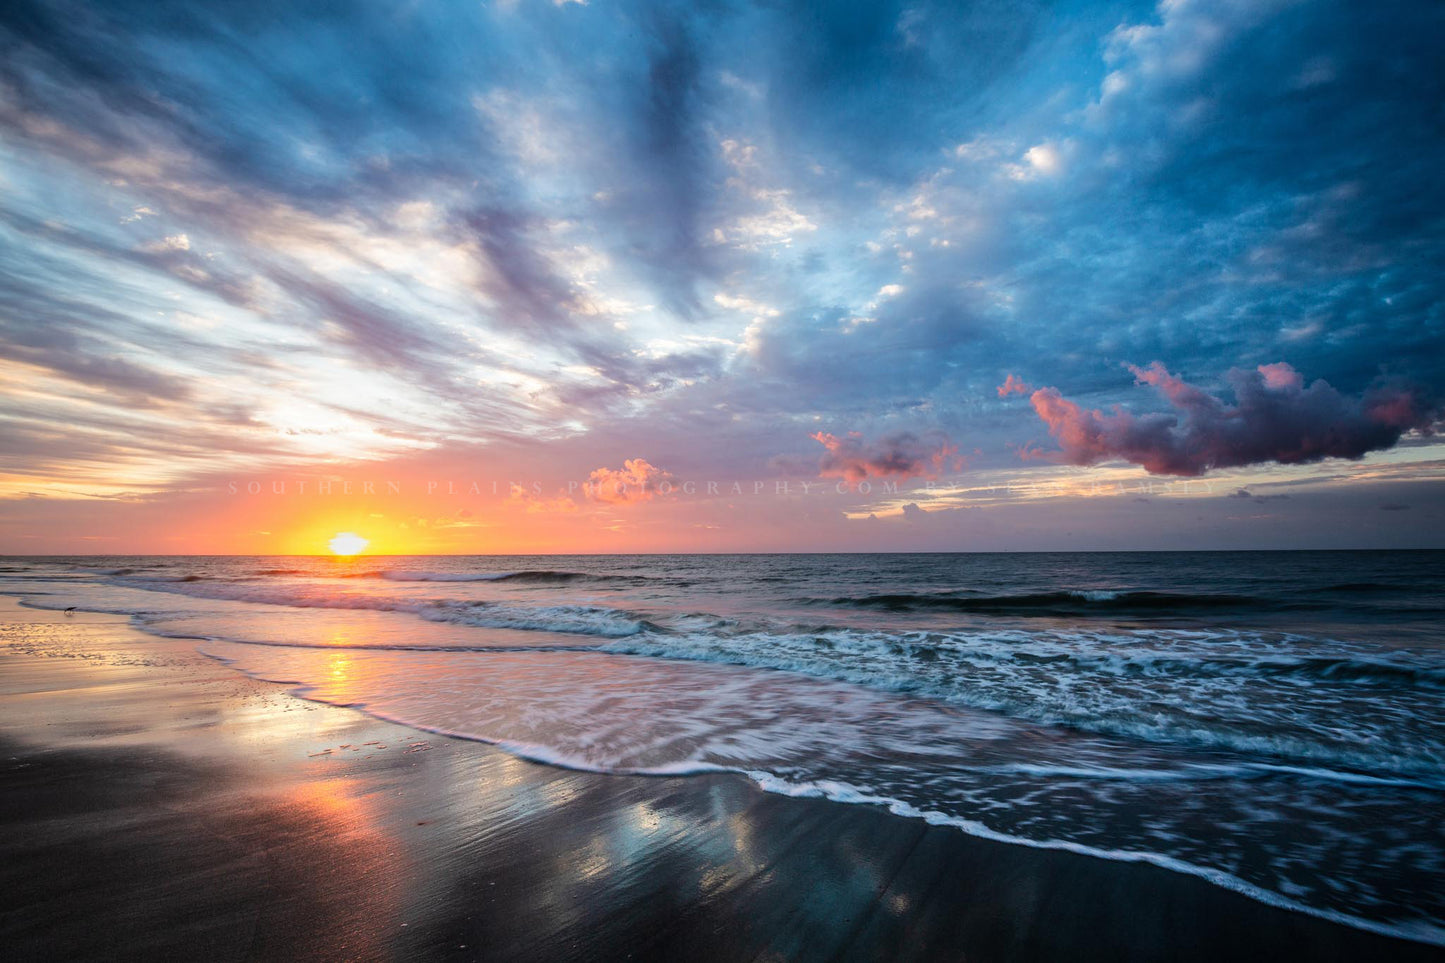 Coastal photography print of a scenic sunrise over the Atlantic Ocean as waves roll ashore on a beach on Hilton Head Island, SC by Sean Ramsey of Southern Plains Photography.